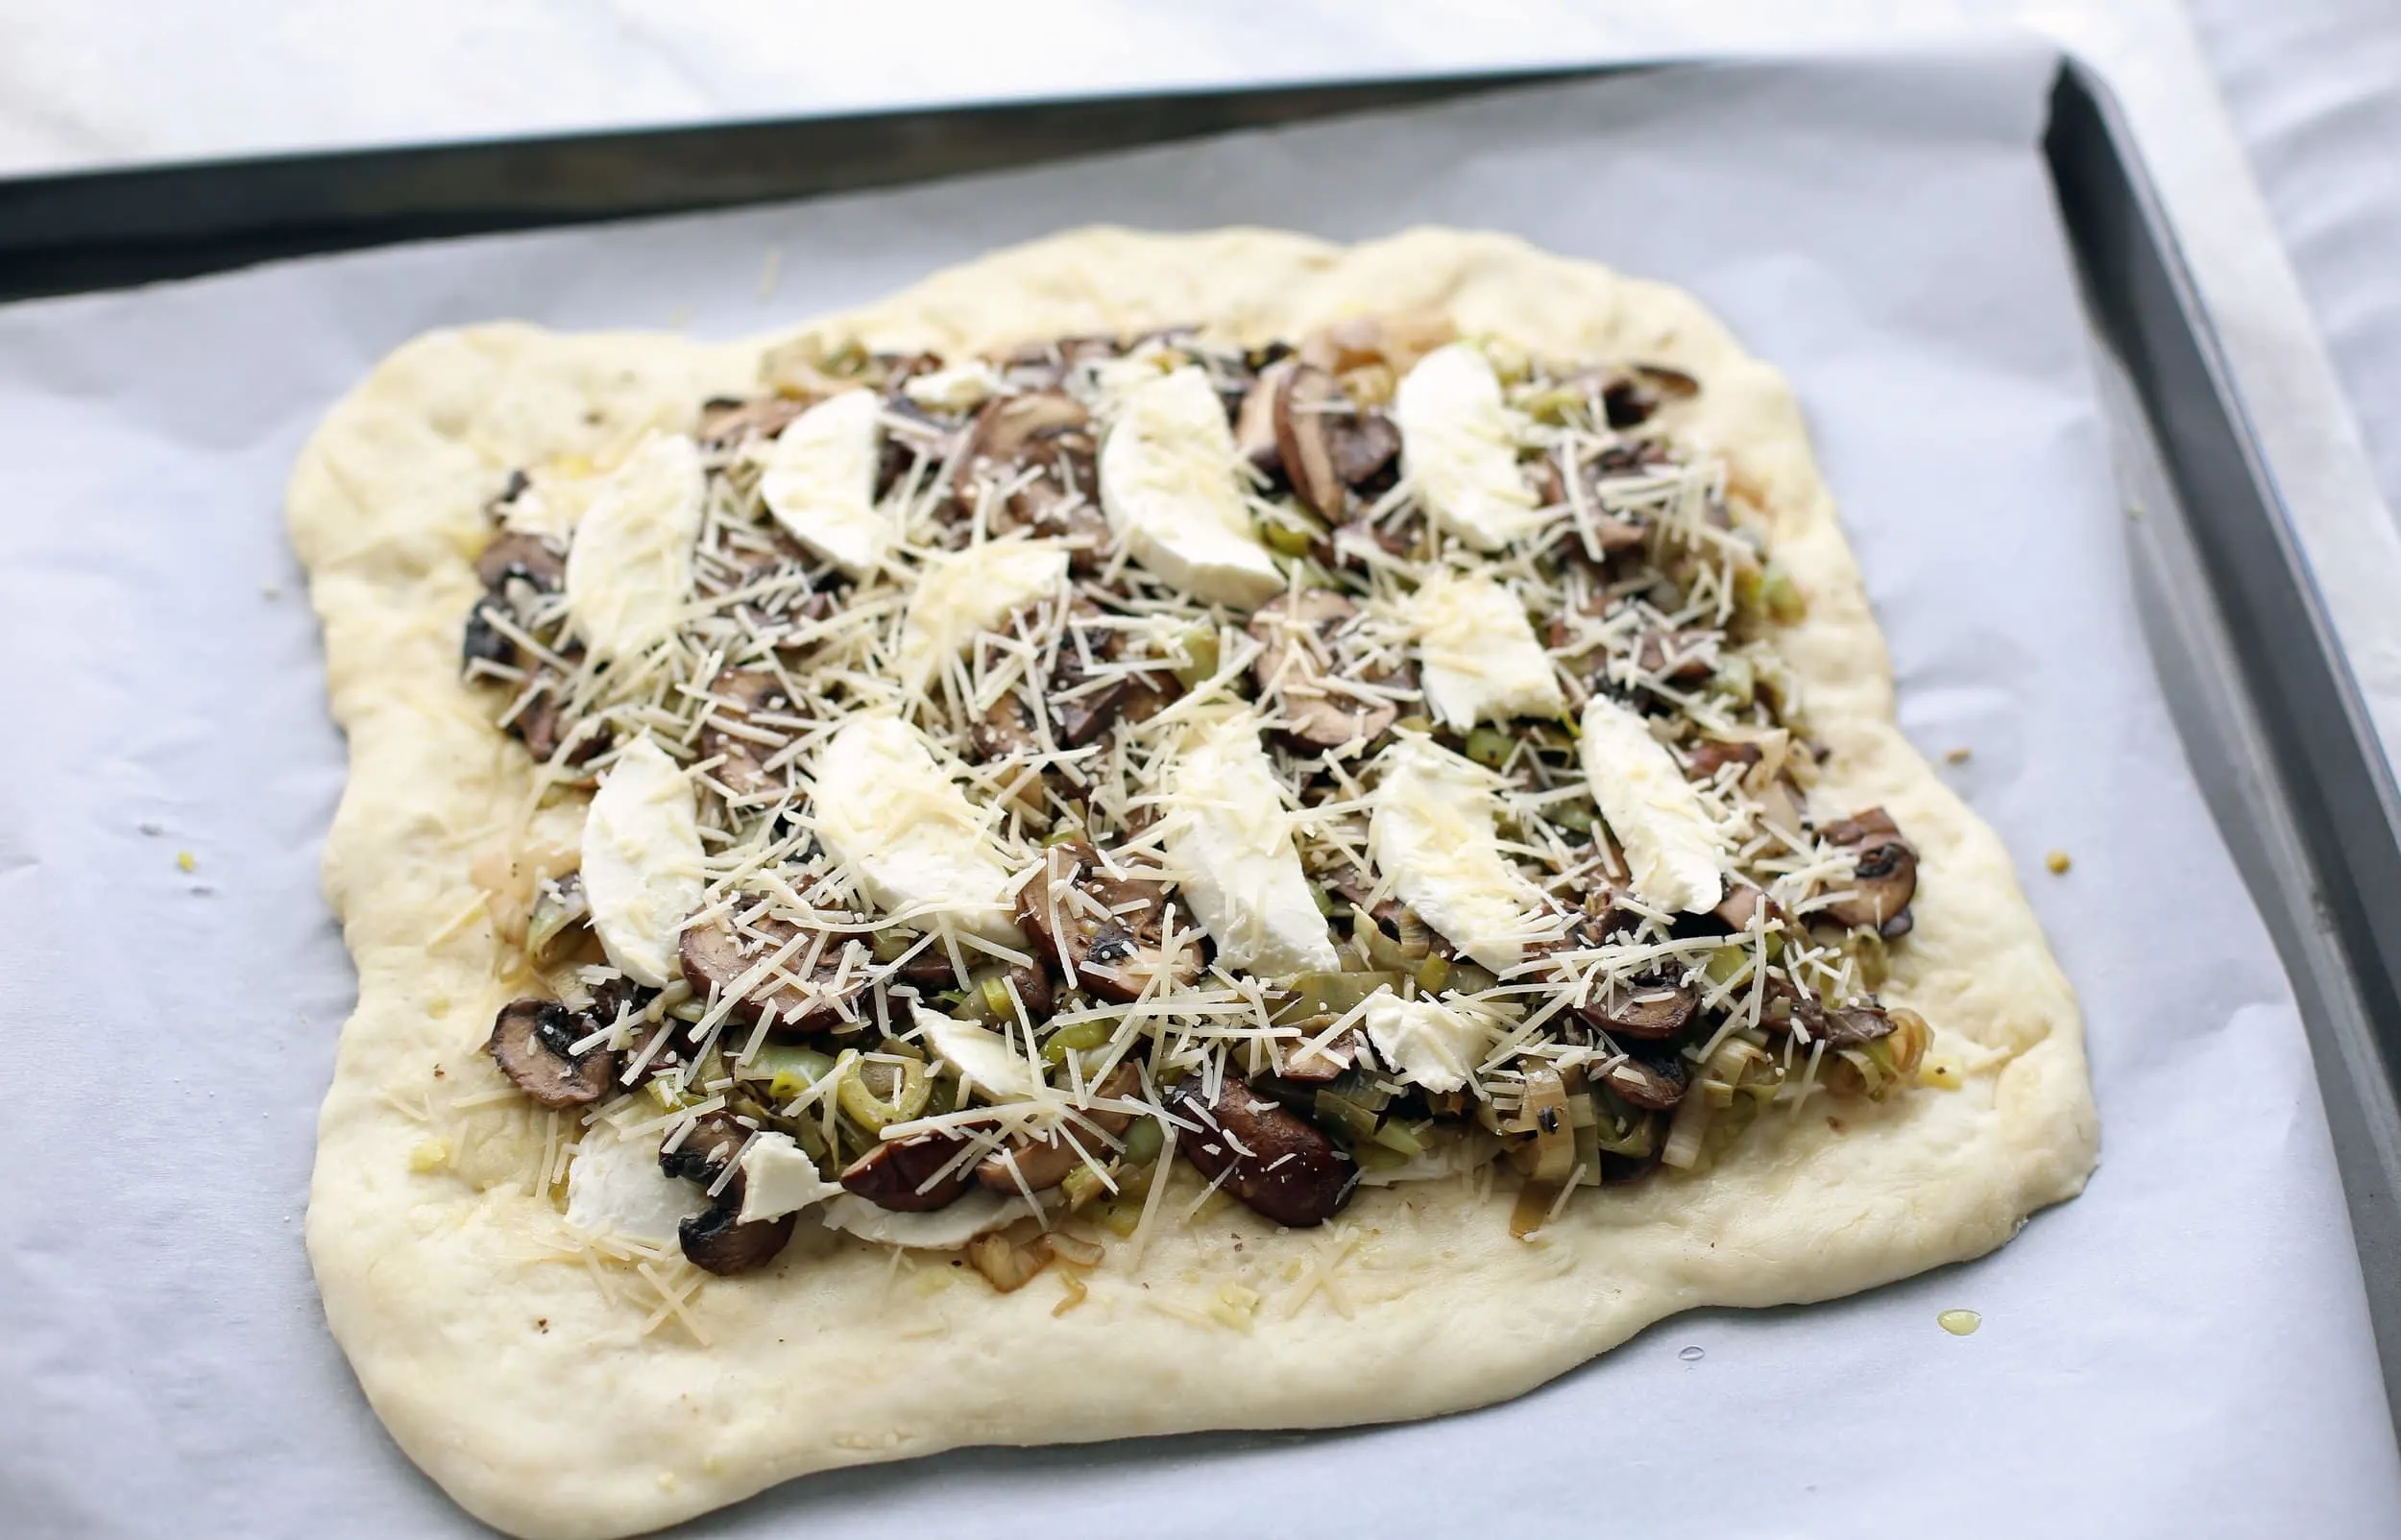 Pizza dough, shaped into a rectangle, with leeks, mushrooms, mozzarella, and parmesan on top.